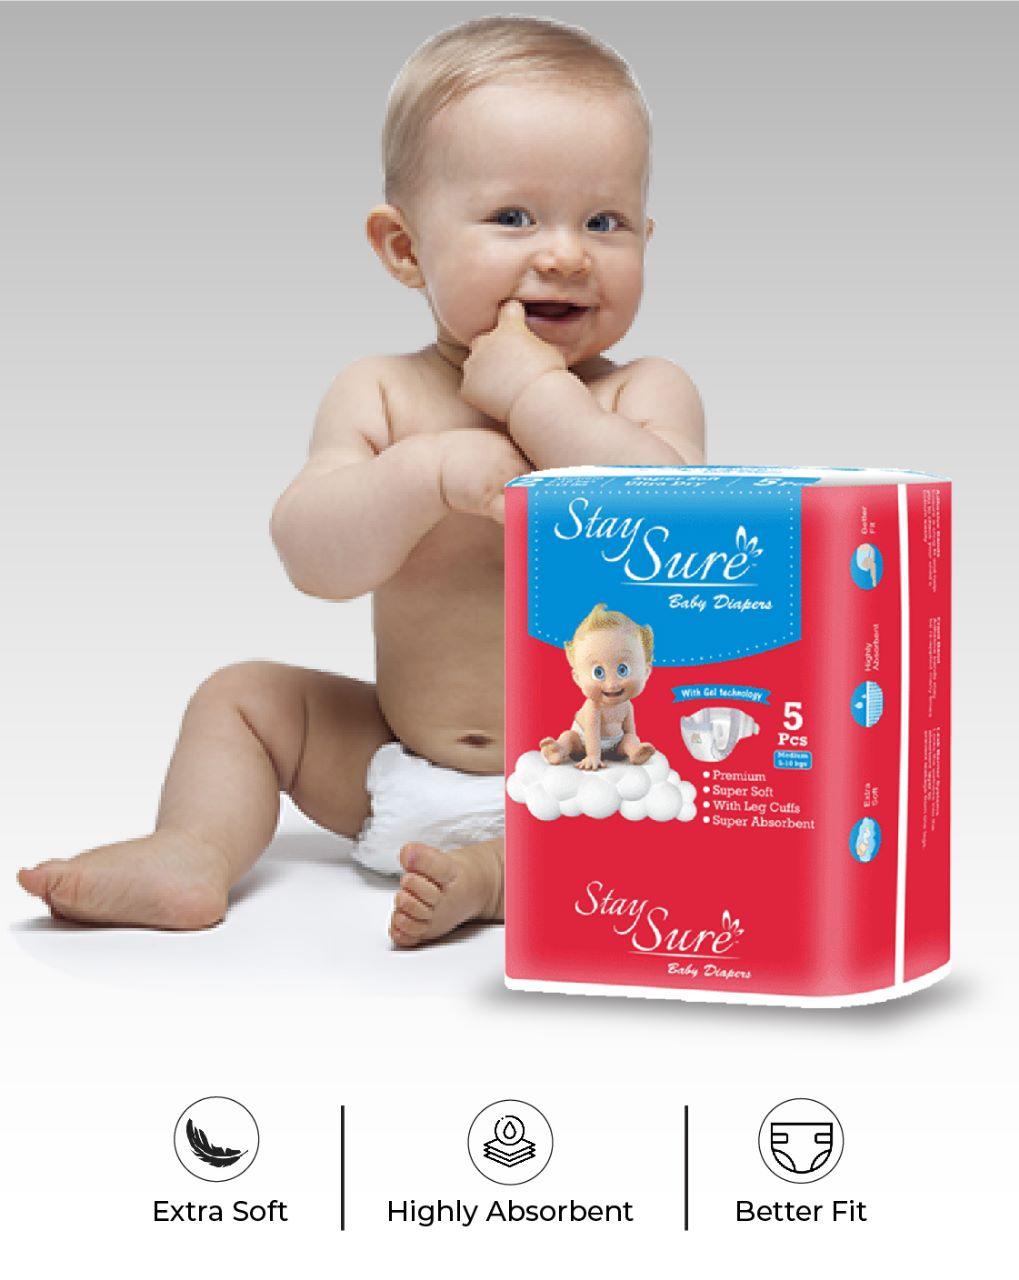 Stay Sure Baby Diaper Sticking type Medium Size - PACK OF 5Pcs - staysure.asia